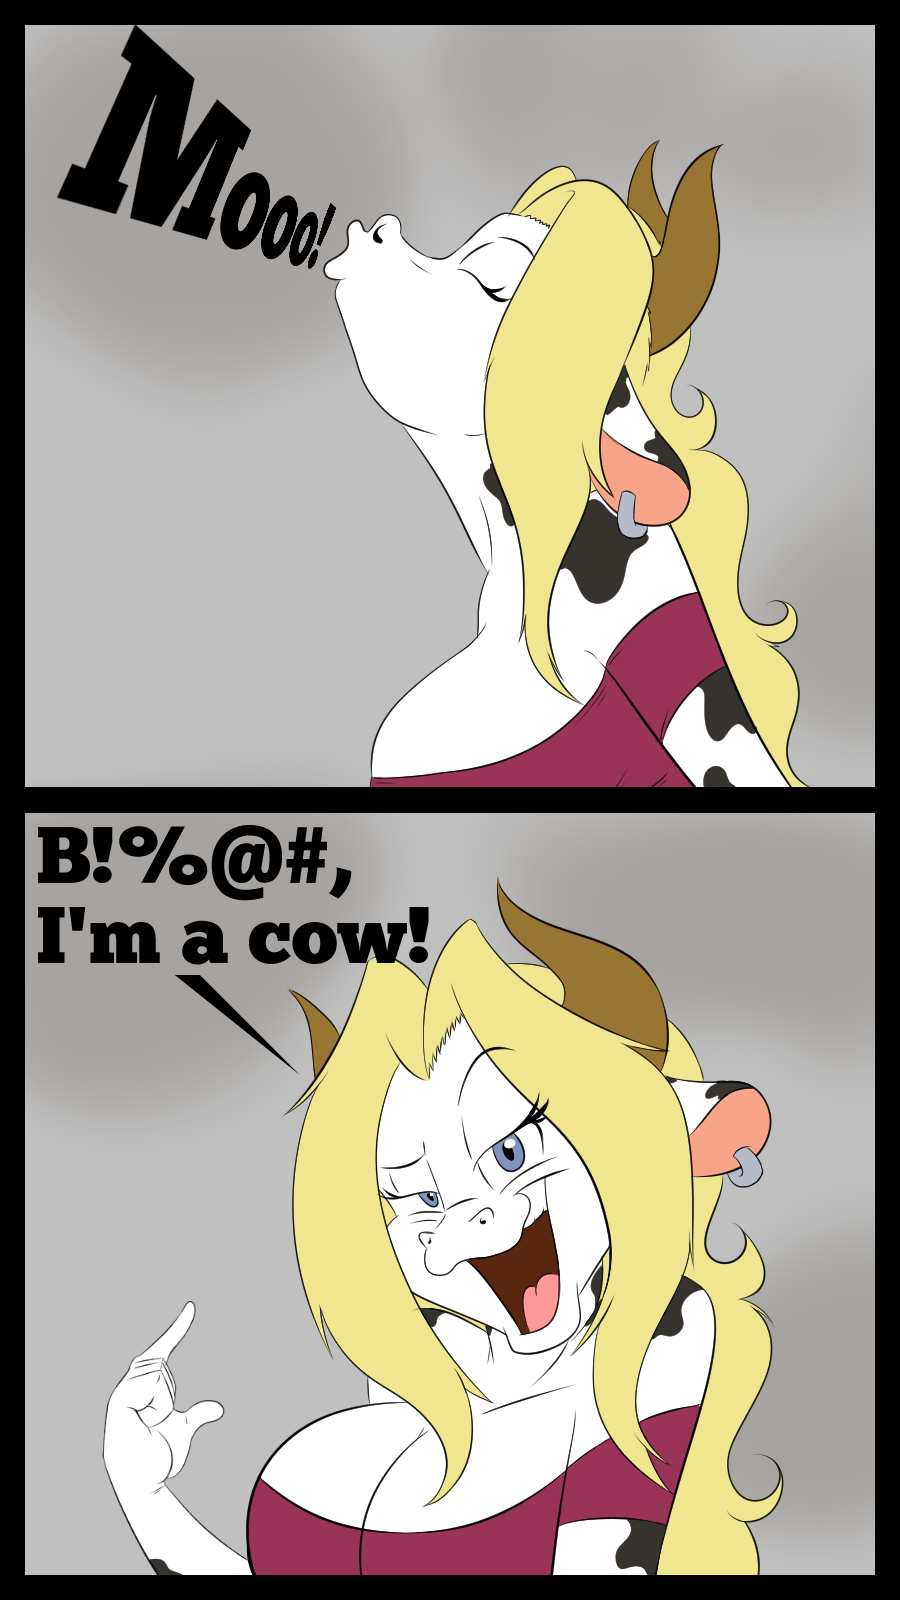 She's A Cow